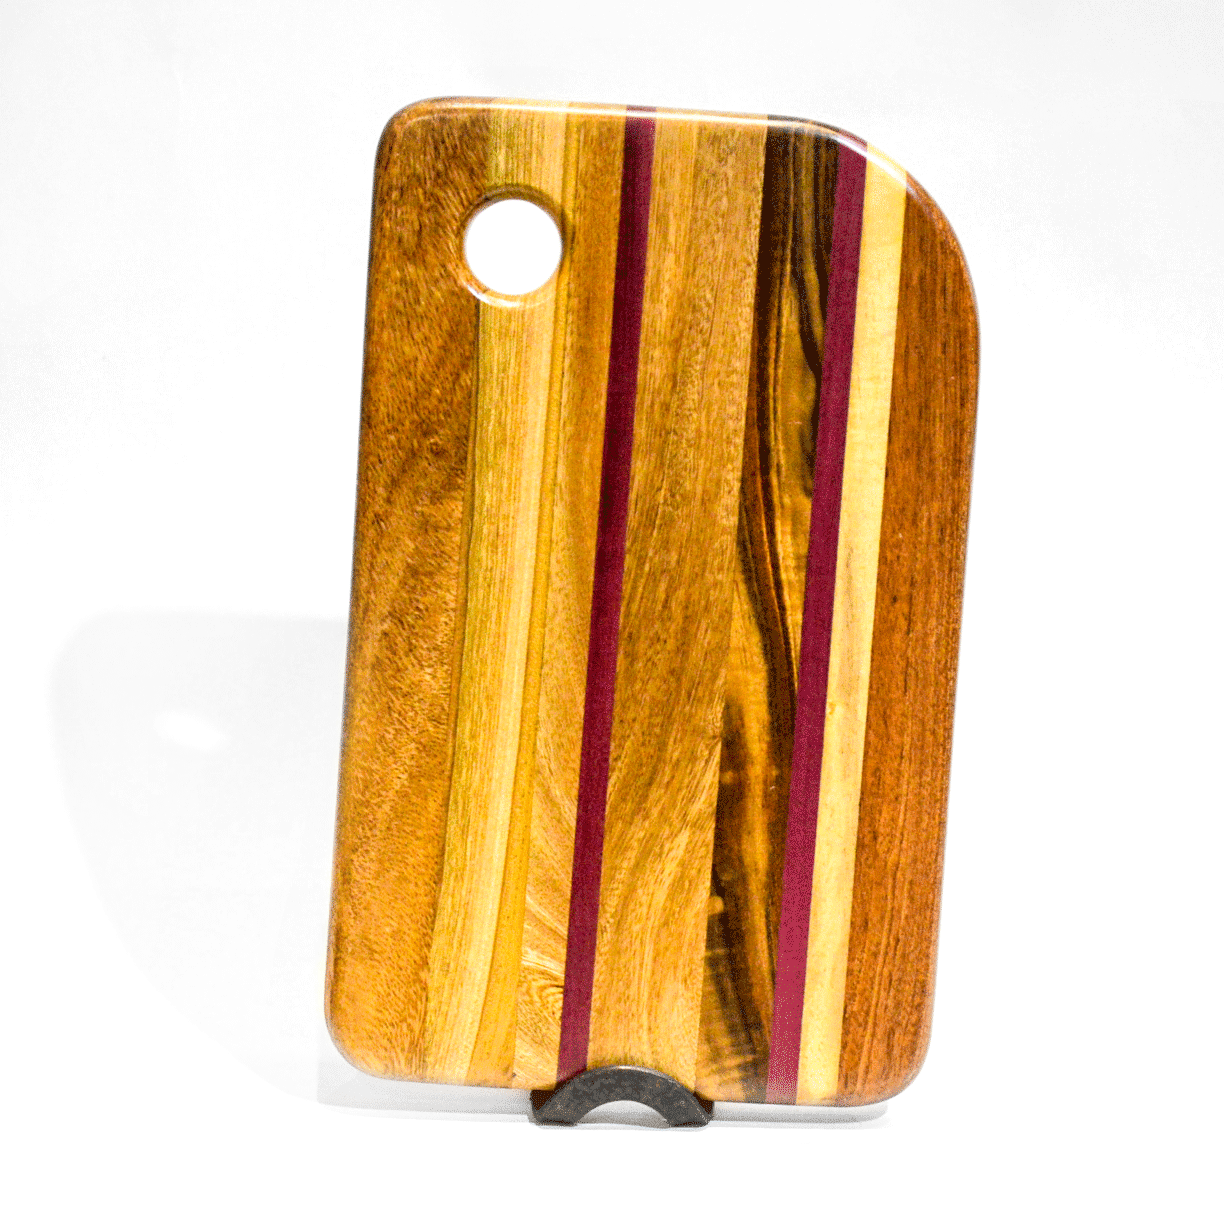 Wooden cutting board - Mixed woods Handle